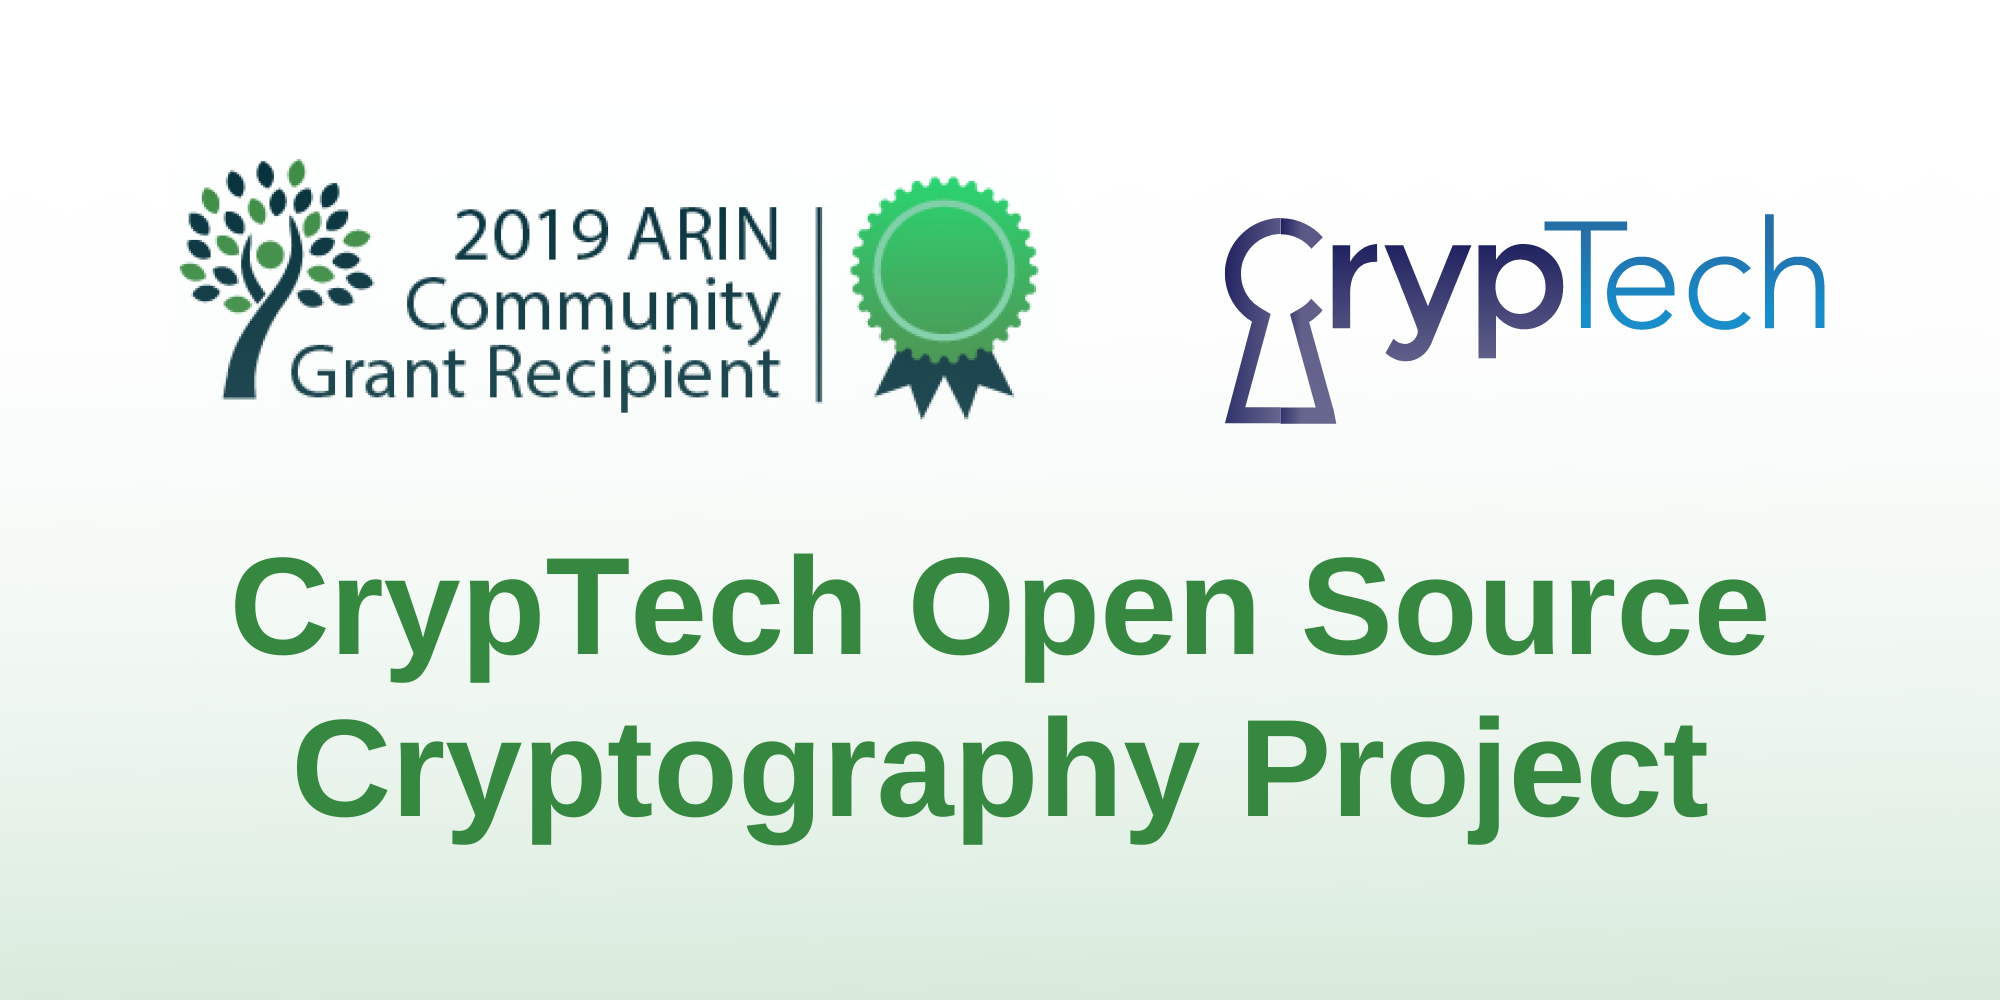 CrypTech Open Source Cryptography Project